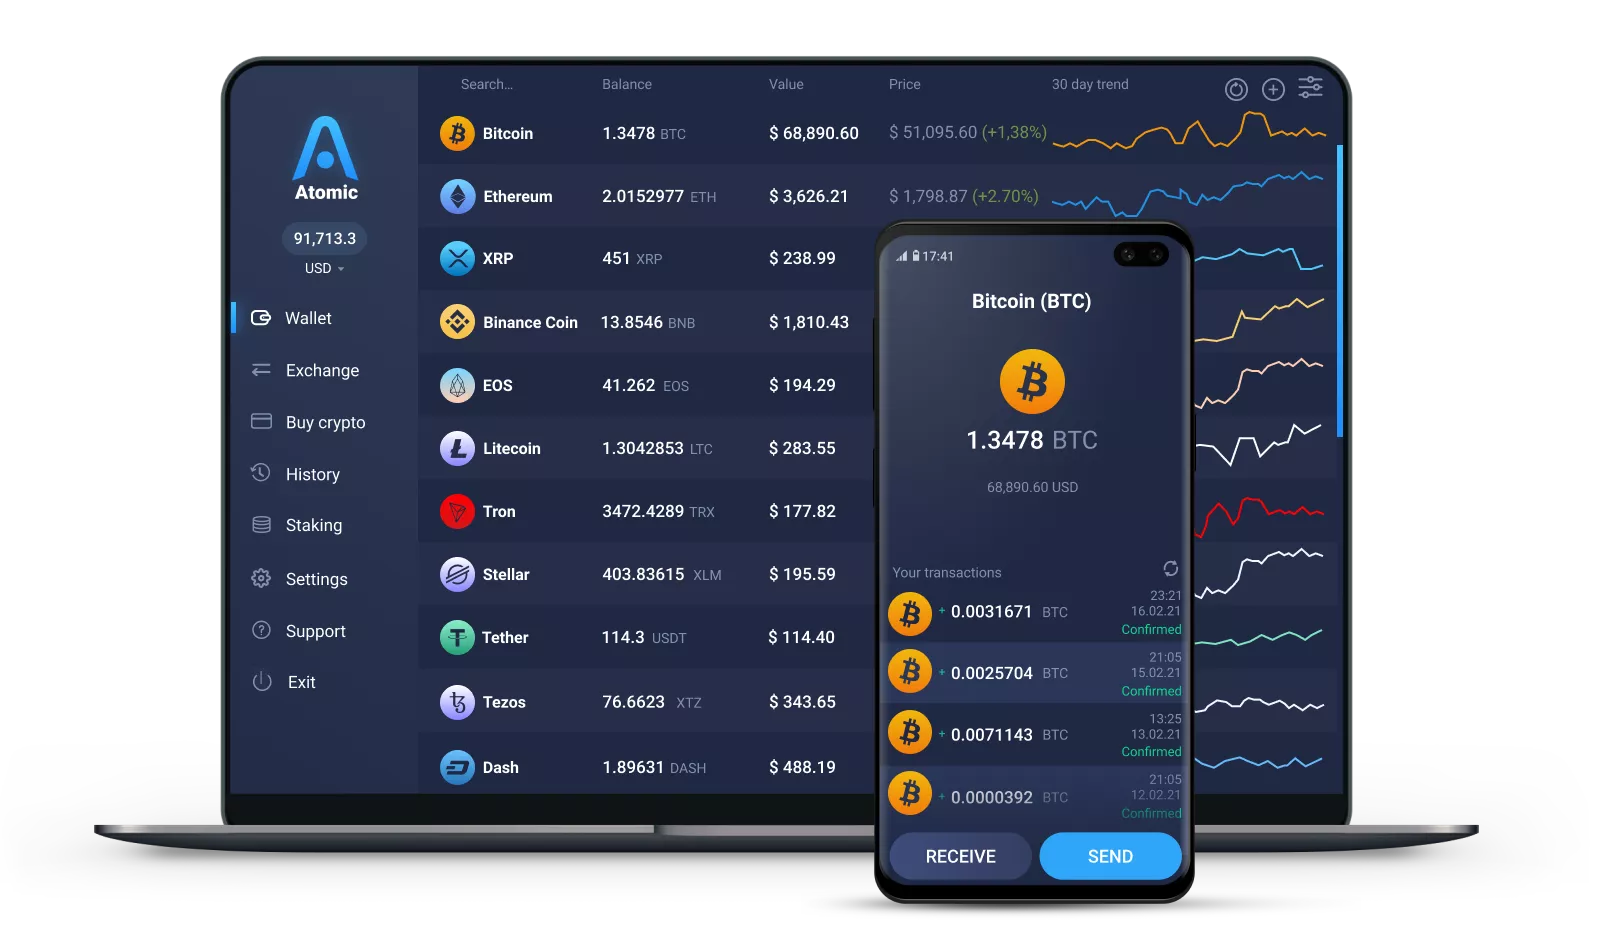 oxygen wallet app free download for Android - 9Apps